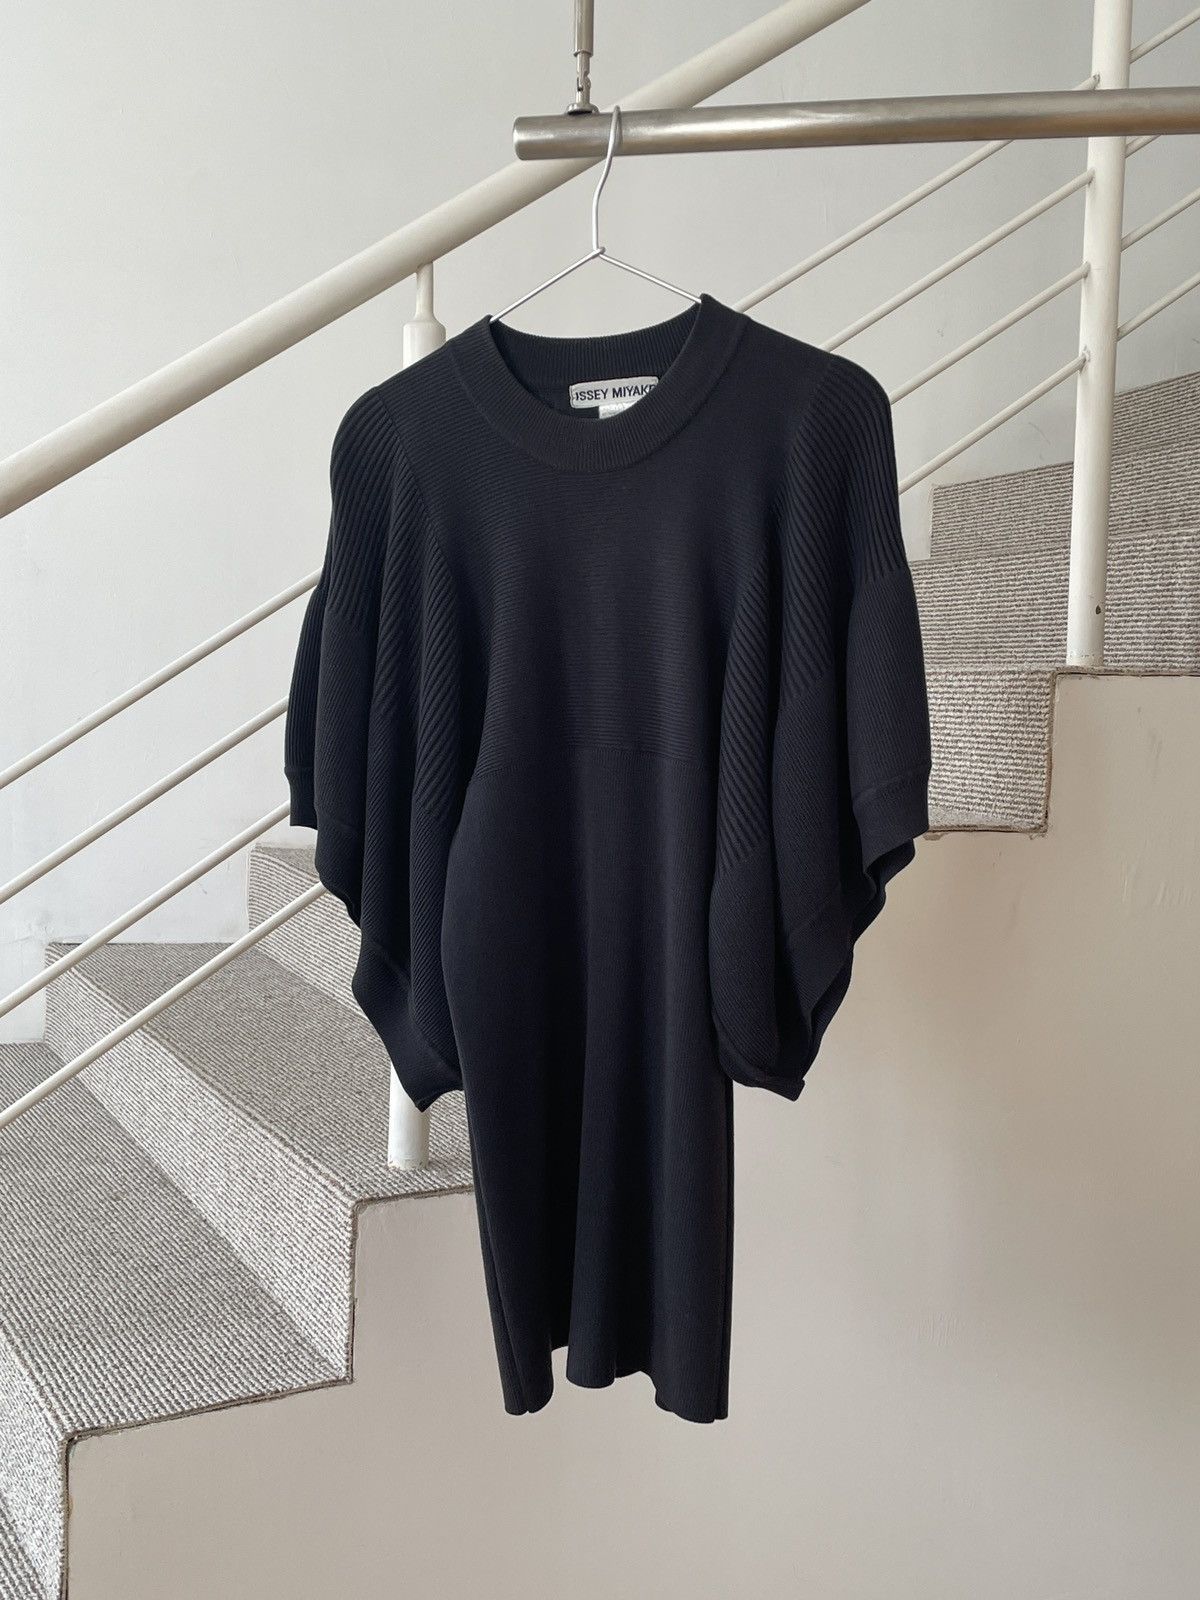 Vintage ISSEY MIYAKE Dress Knit Sweater Bell Sleeve Pleated Poncho ...